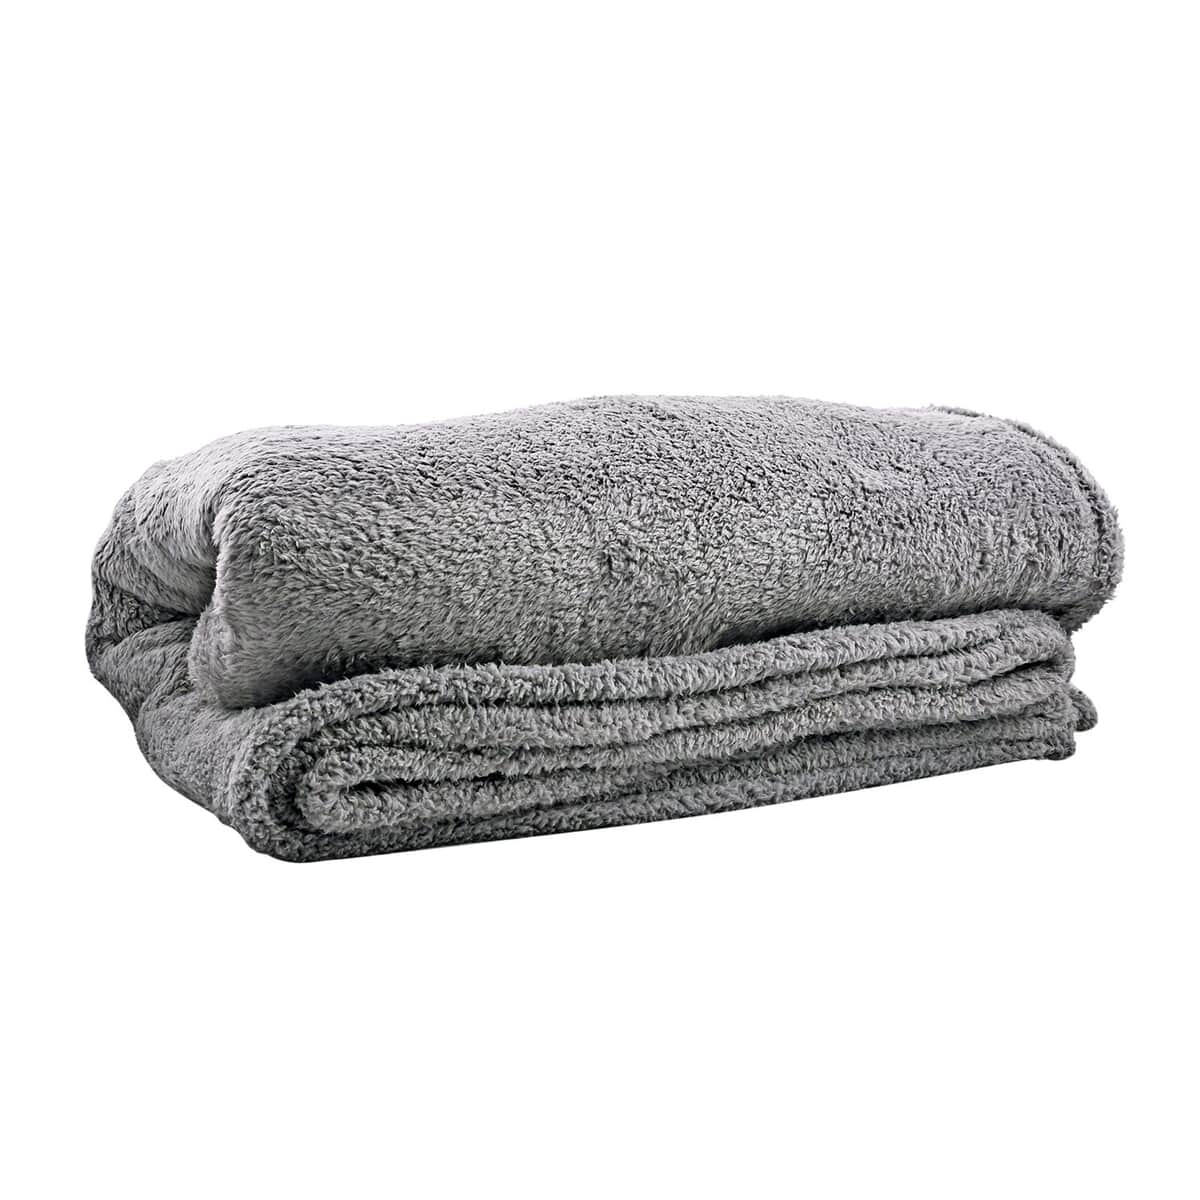 HOMESMART Gray Solid Sherpa Microfiber Throw (59"x78") image number 1